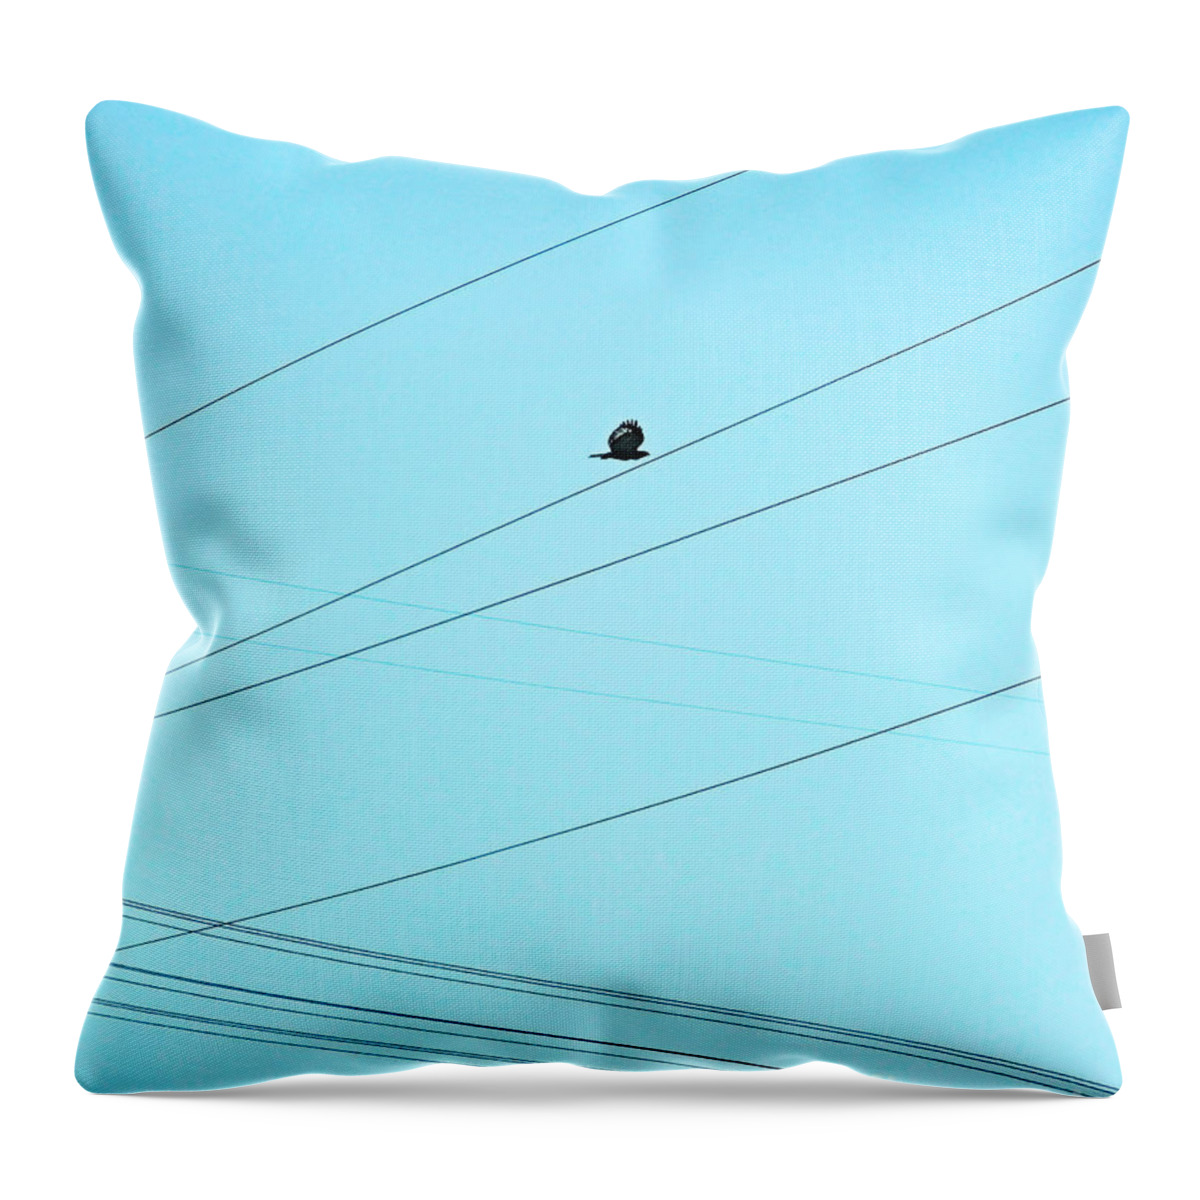 Hawk Throw Pillow featuring the photograph Hawk in the Obstacle Course by Lizi Beard-Ward